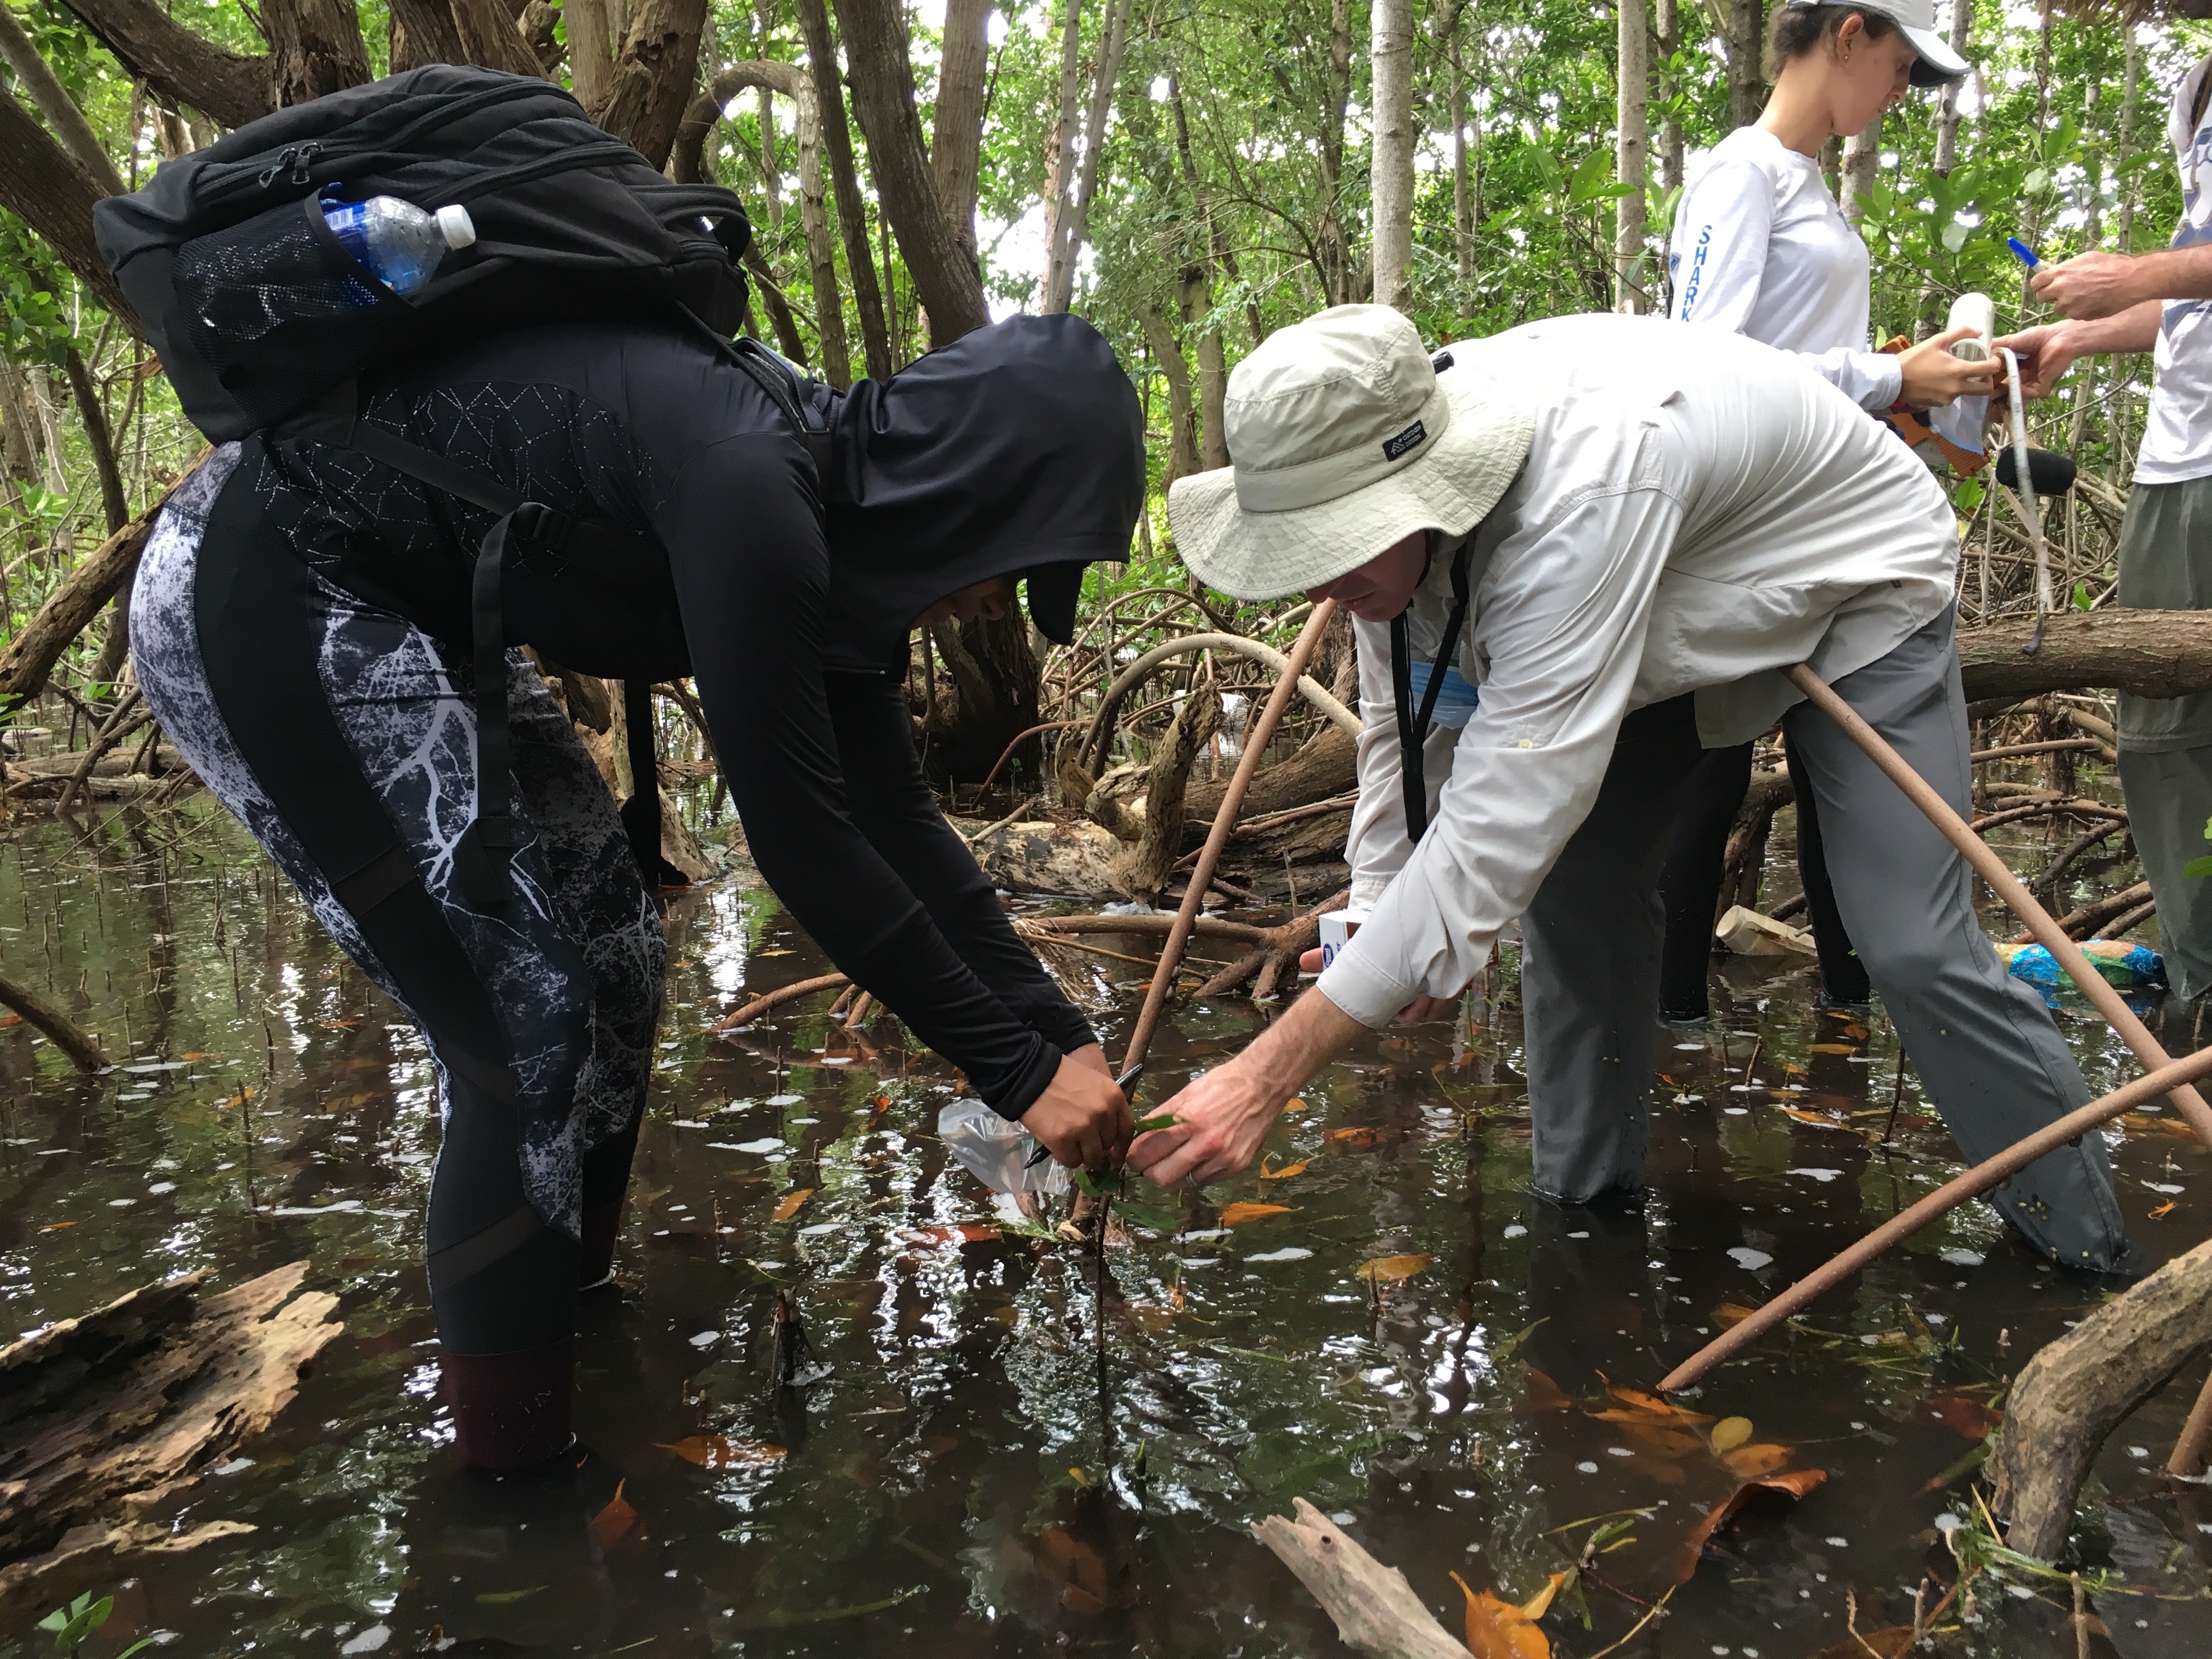 Dr. John Kominoski and Priscilla Brown (FIU Teach Undergraduate) collecting mangrove leaves from seedling mangrove trees in Biscayne National Park.